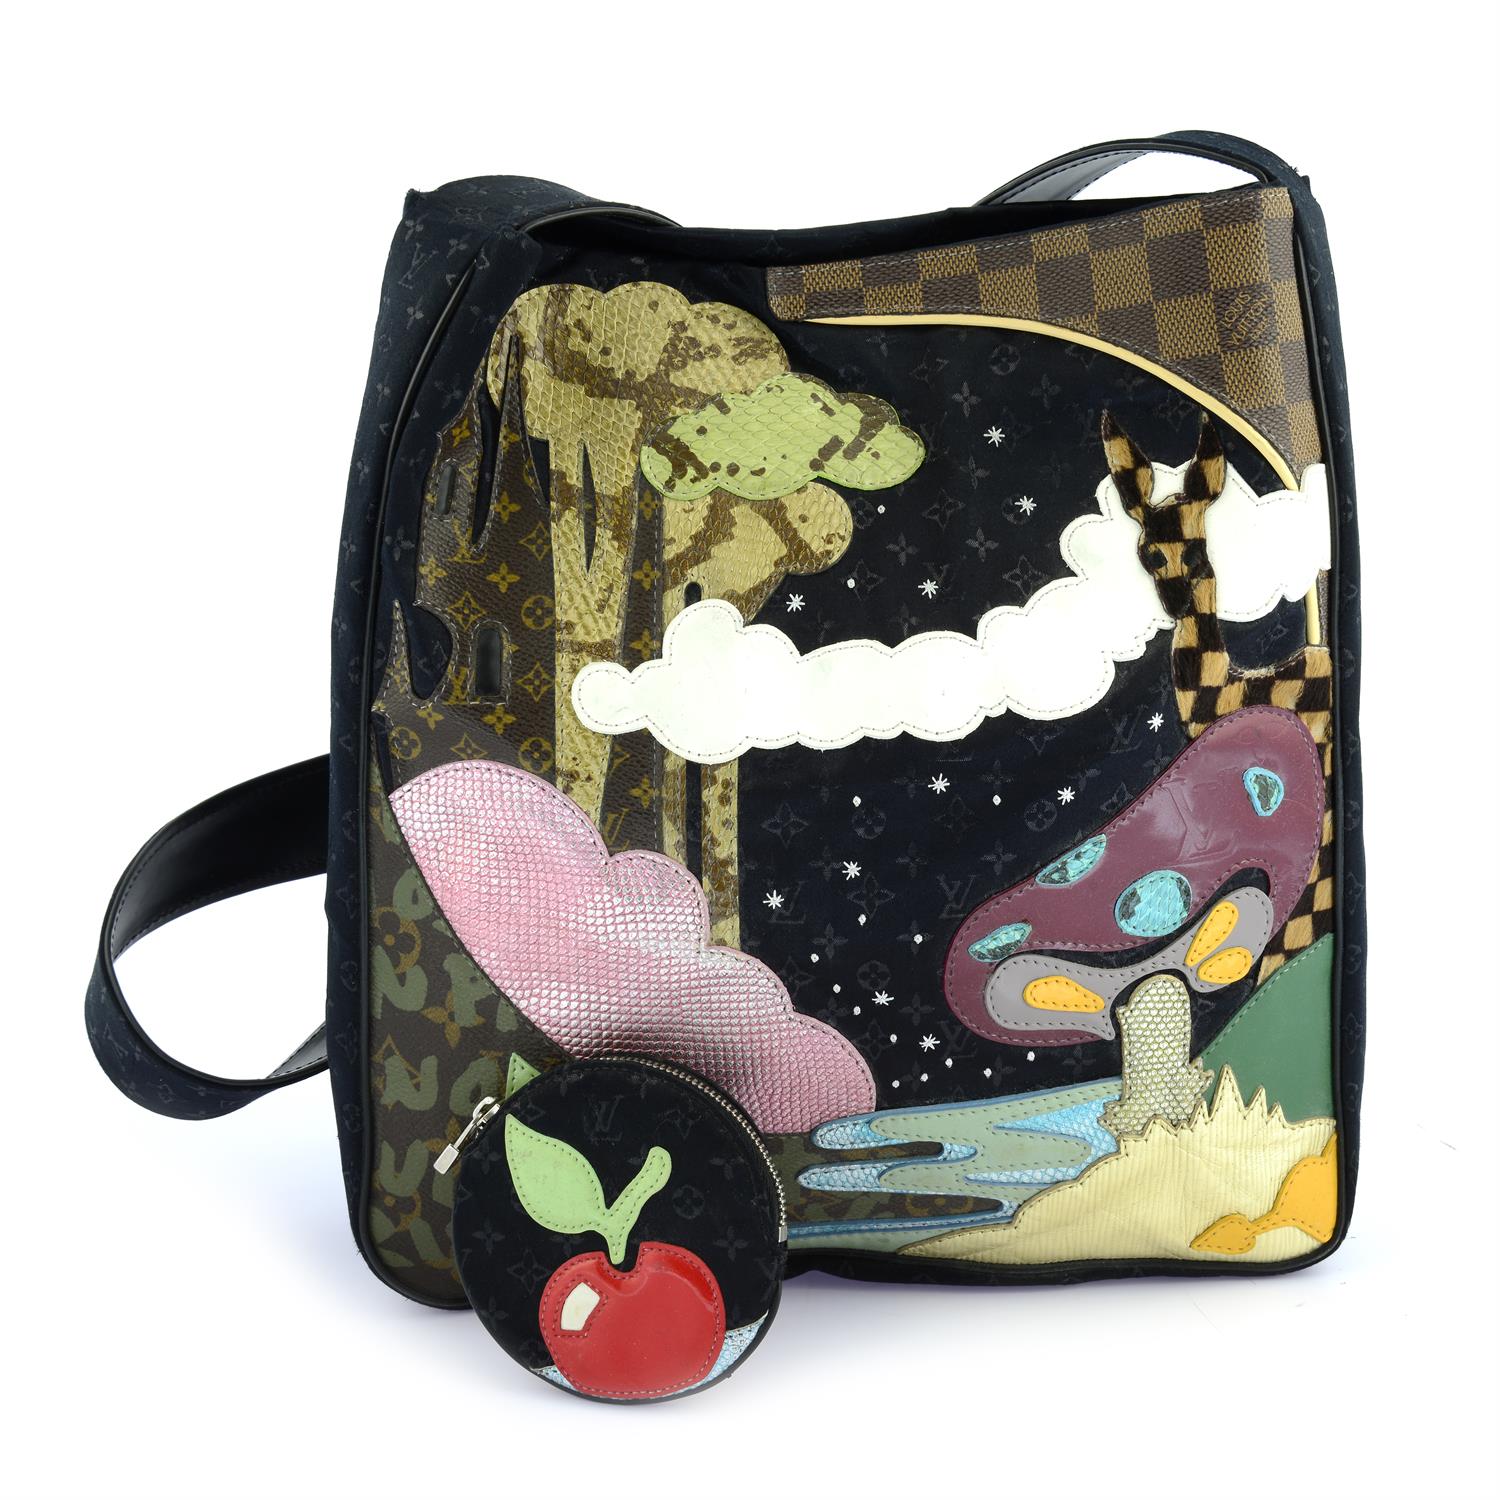 LOUIS VUITTON - a limited edition Marc Jacobs and Julie Verhoeven shoulder bag and coin purse.